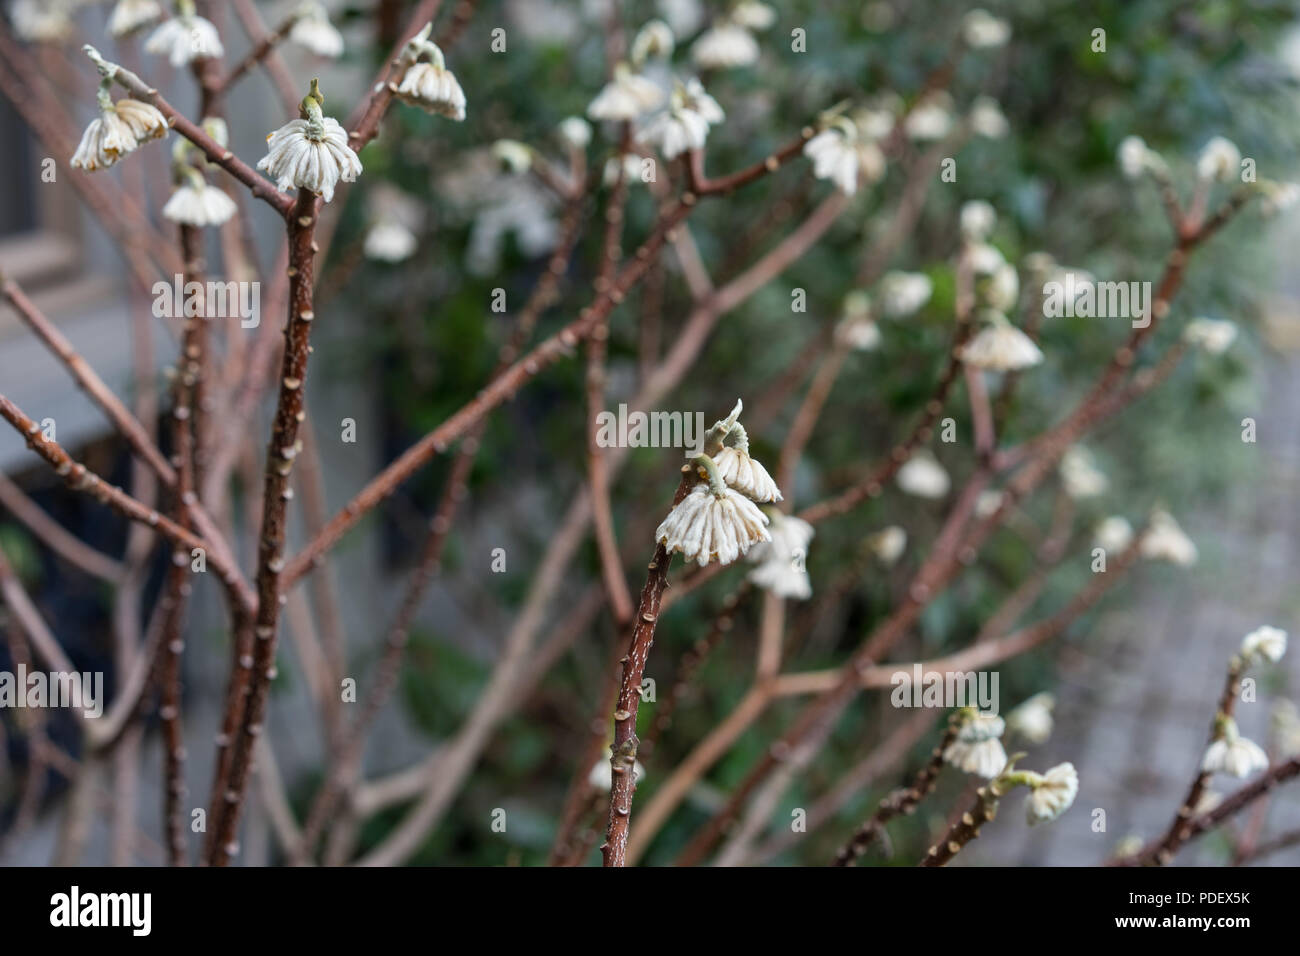 Plant used for japanese paper with fragile white flower bud Stock Photo